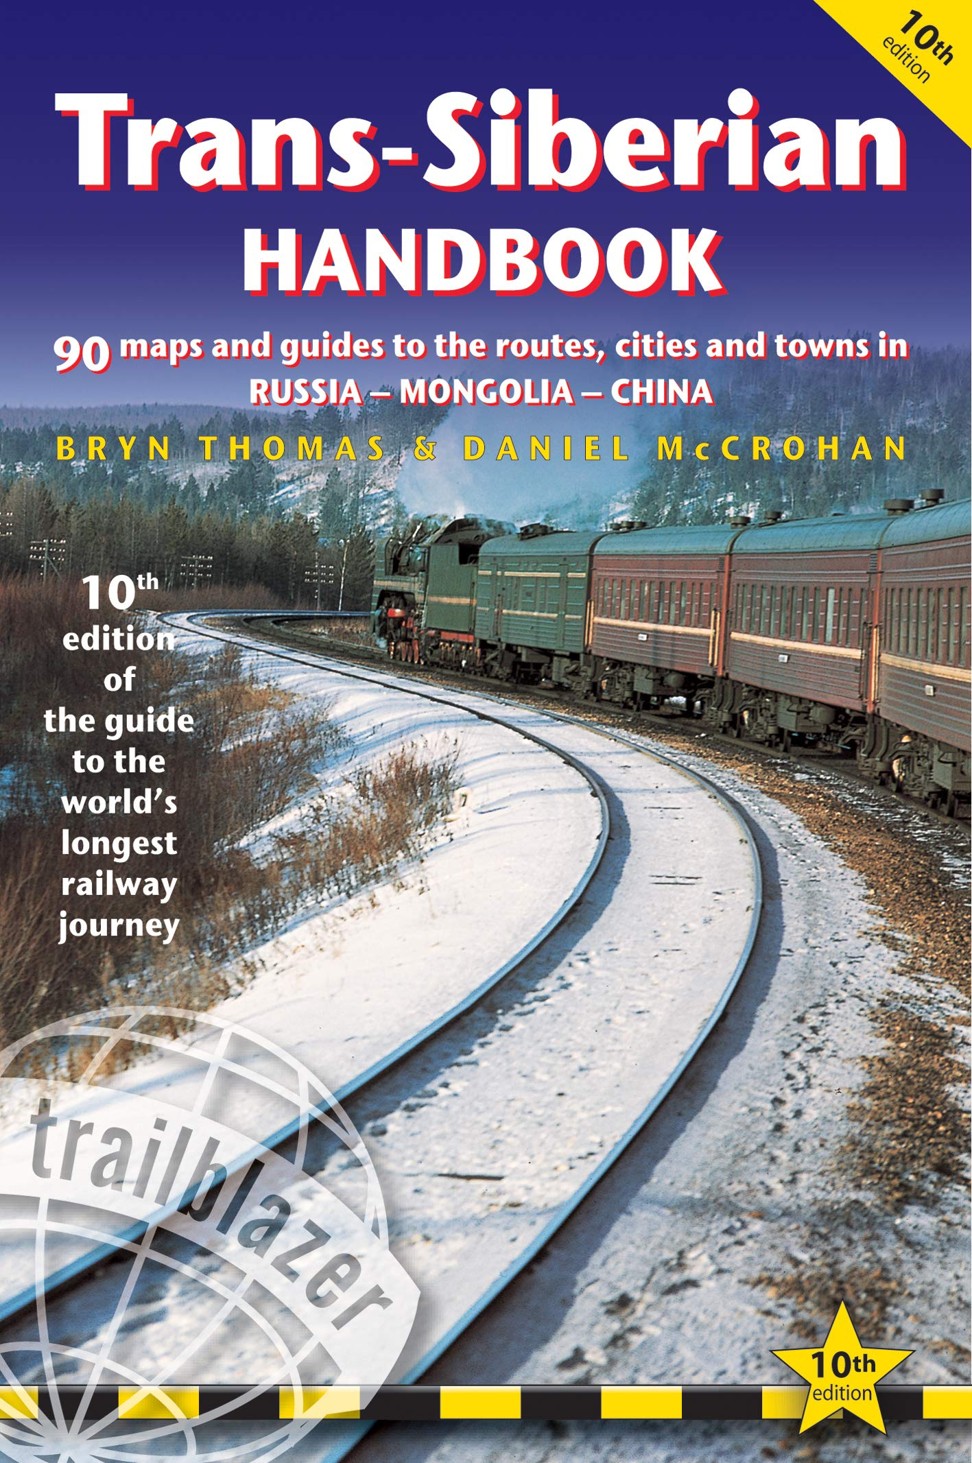 While the content of the guidebook has much improved since the Trans-Siberian Handbook was first published in 1988, one thing has remained the same – its cover image.